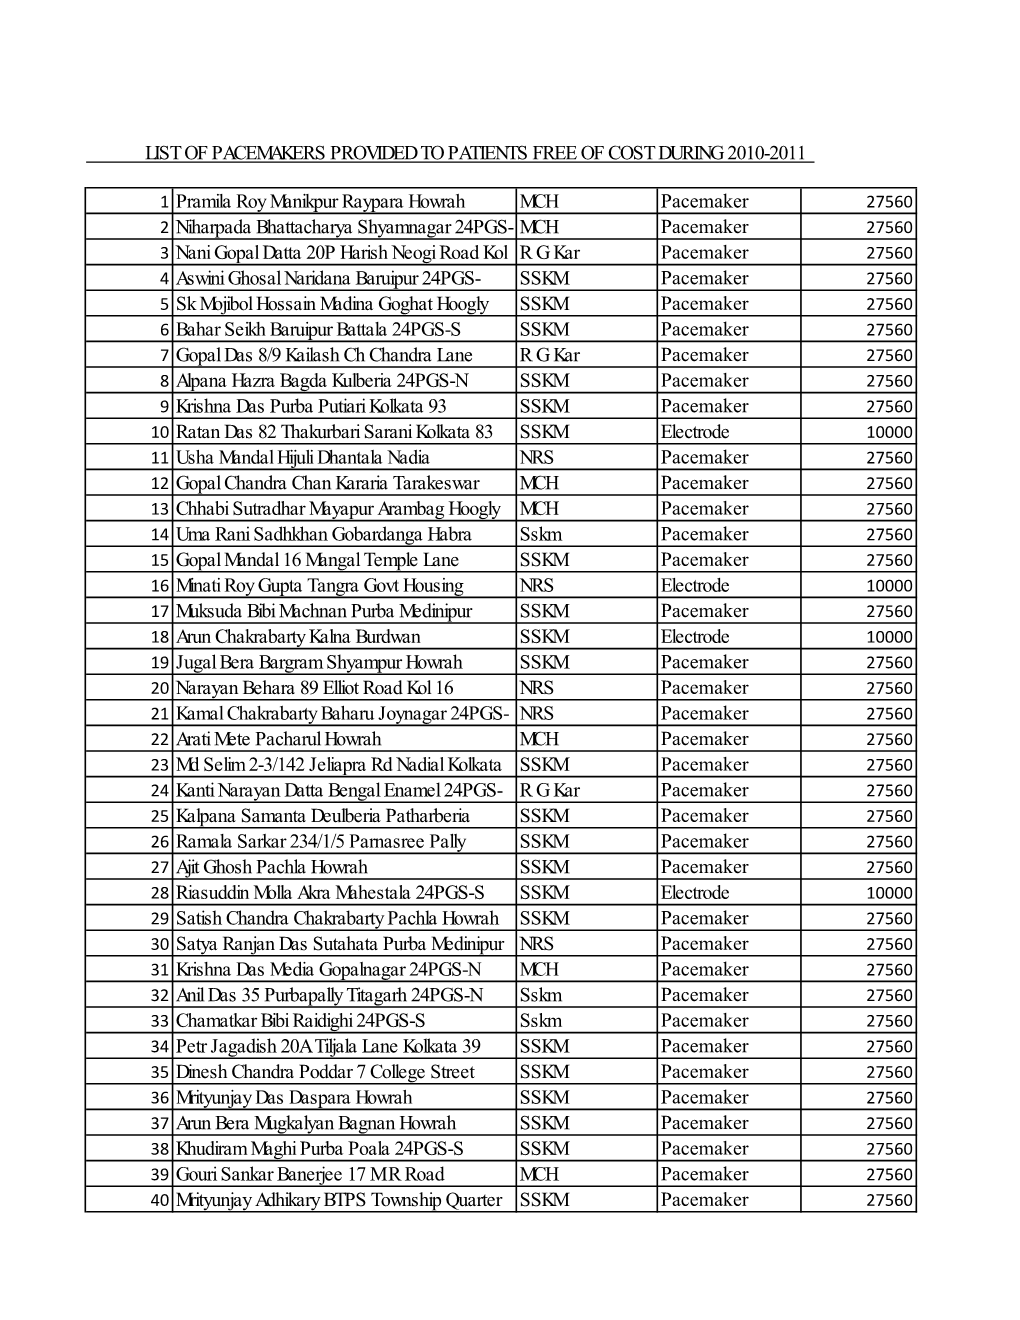 List of Pacemakers Provided to Patients Free of Cost During 2010-2011